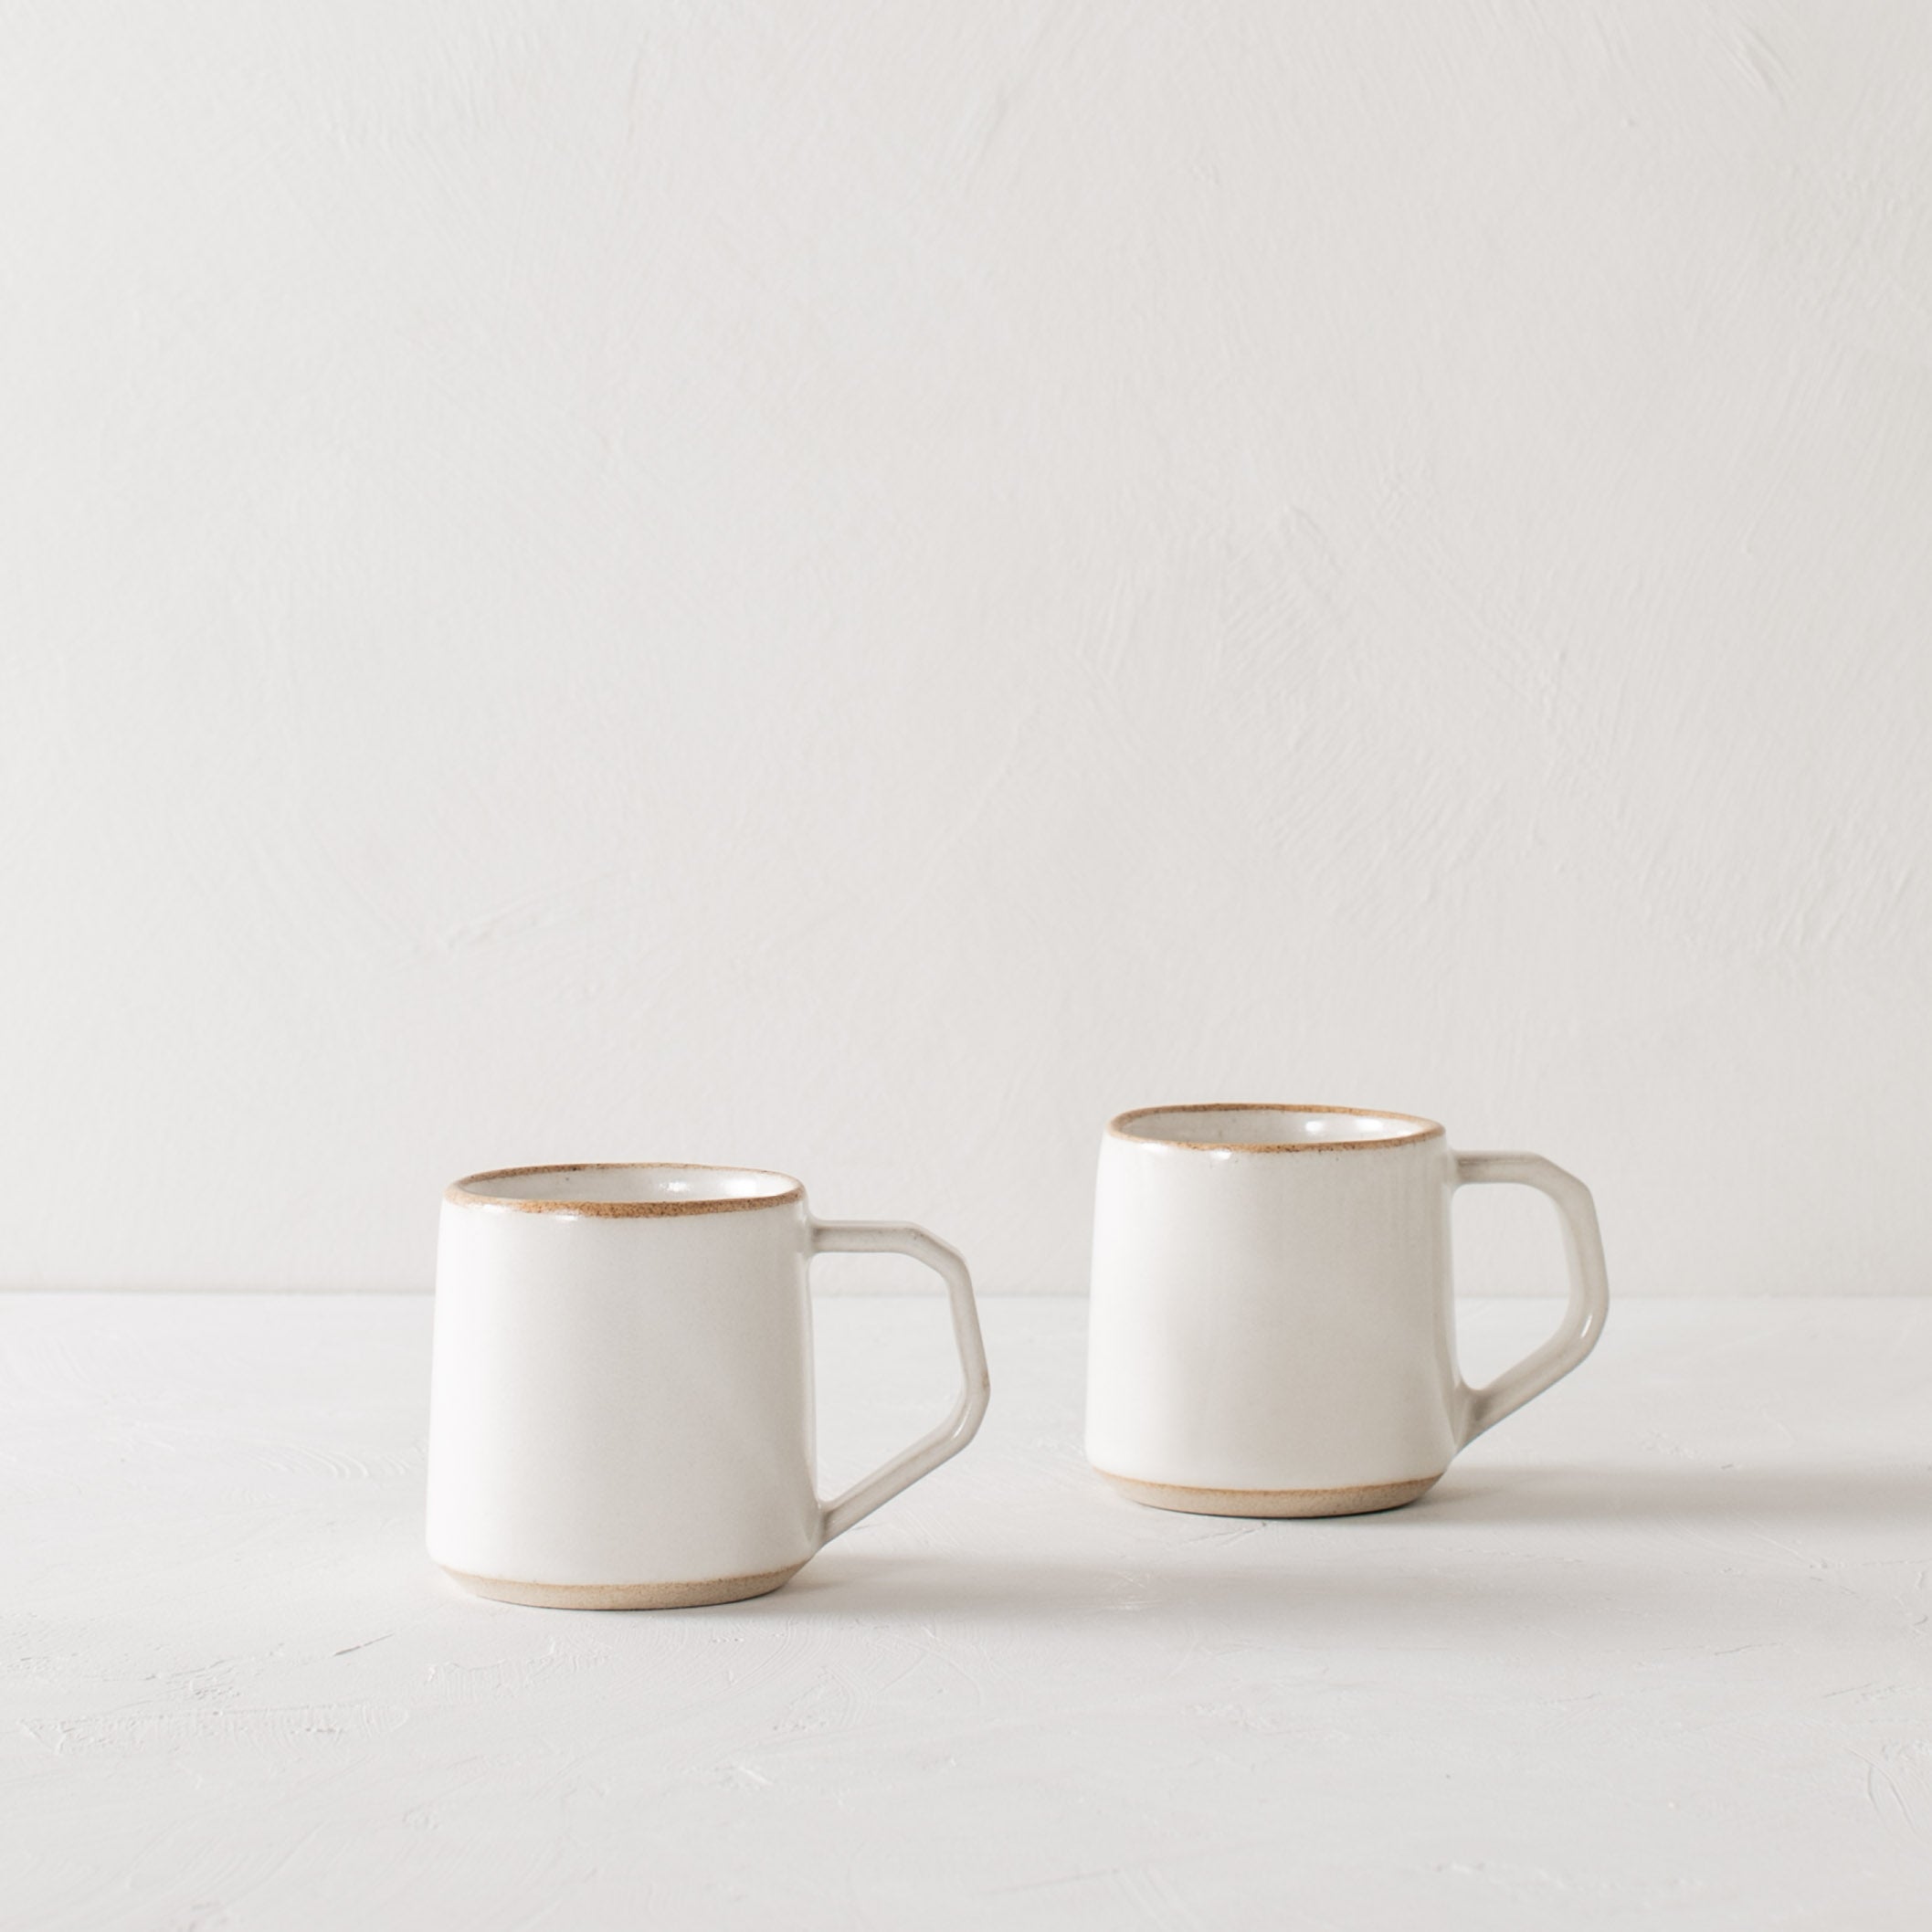 Pair of white minimal ceramic mug is staged on a white textured table top and white textured back drop. Mugs have exposed warm stoneware on the rims as well as the base. Handles are geometric in shape but still rounded. Convivial Production, Kansas City Ceramics. Handmade ceramic mug.  